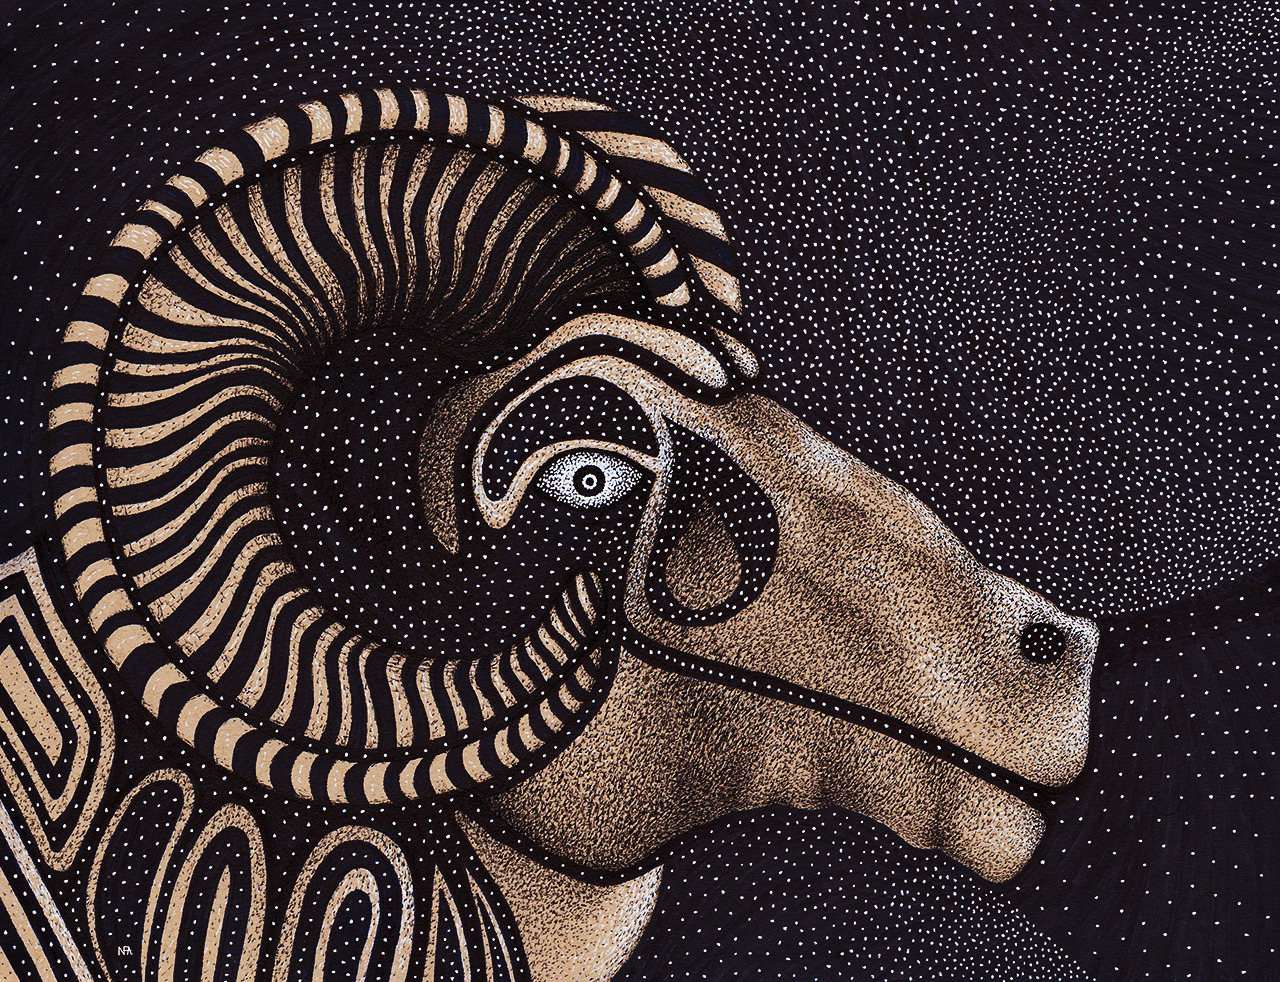 Vision of a Ram by Nathaniel Armstrong Black ink, white ink, marker on toned tan paper. 14" x 11"